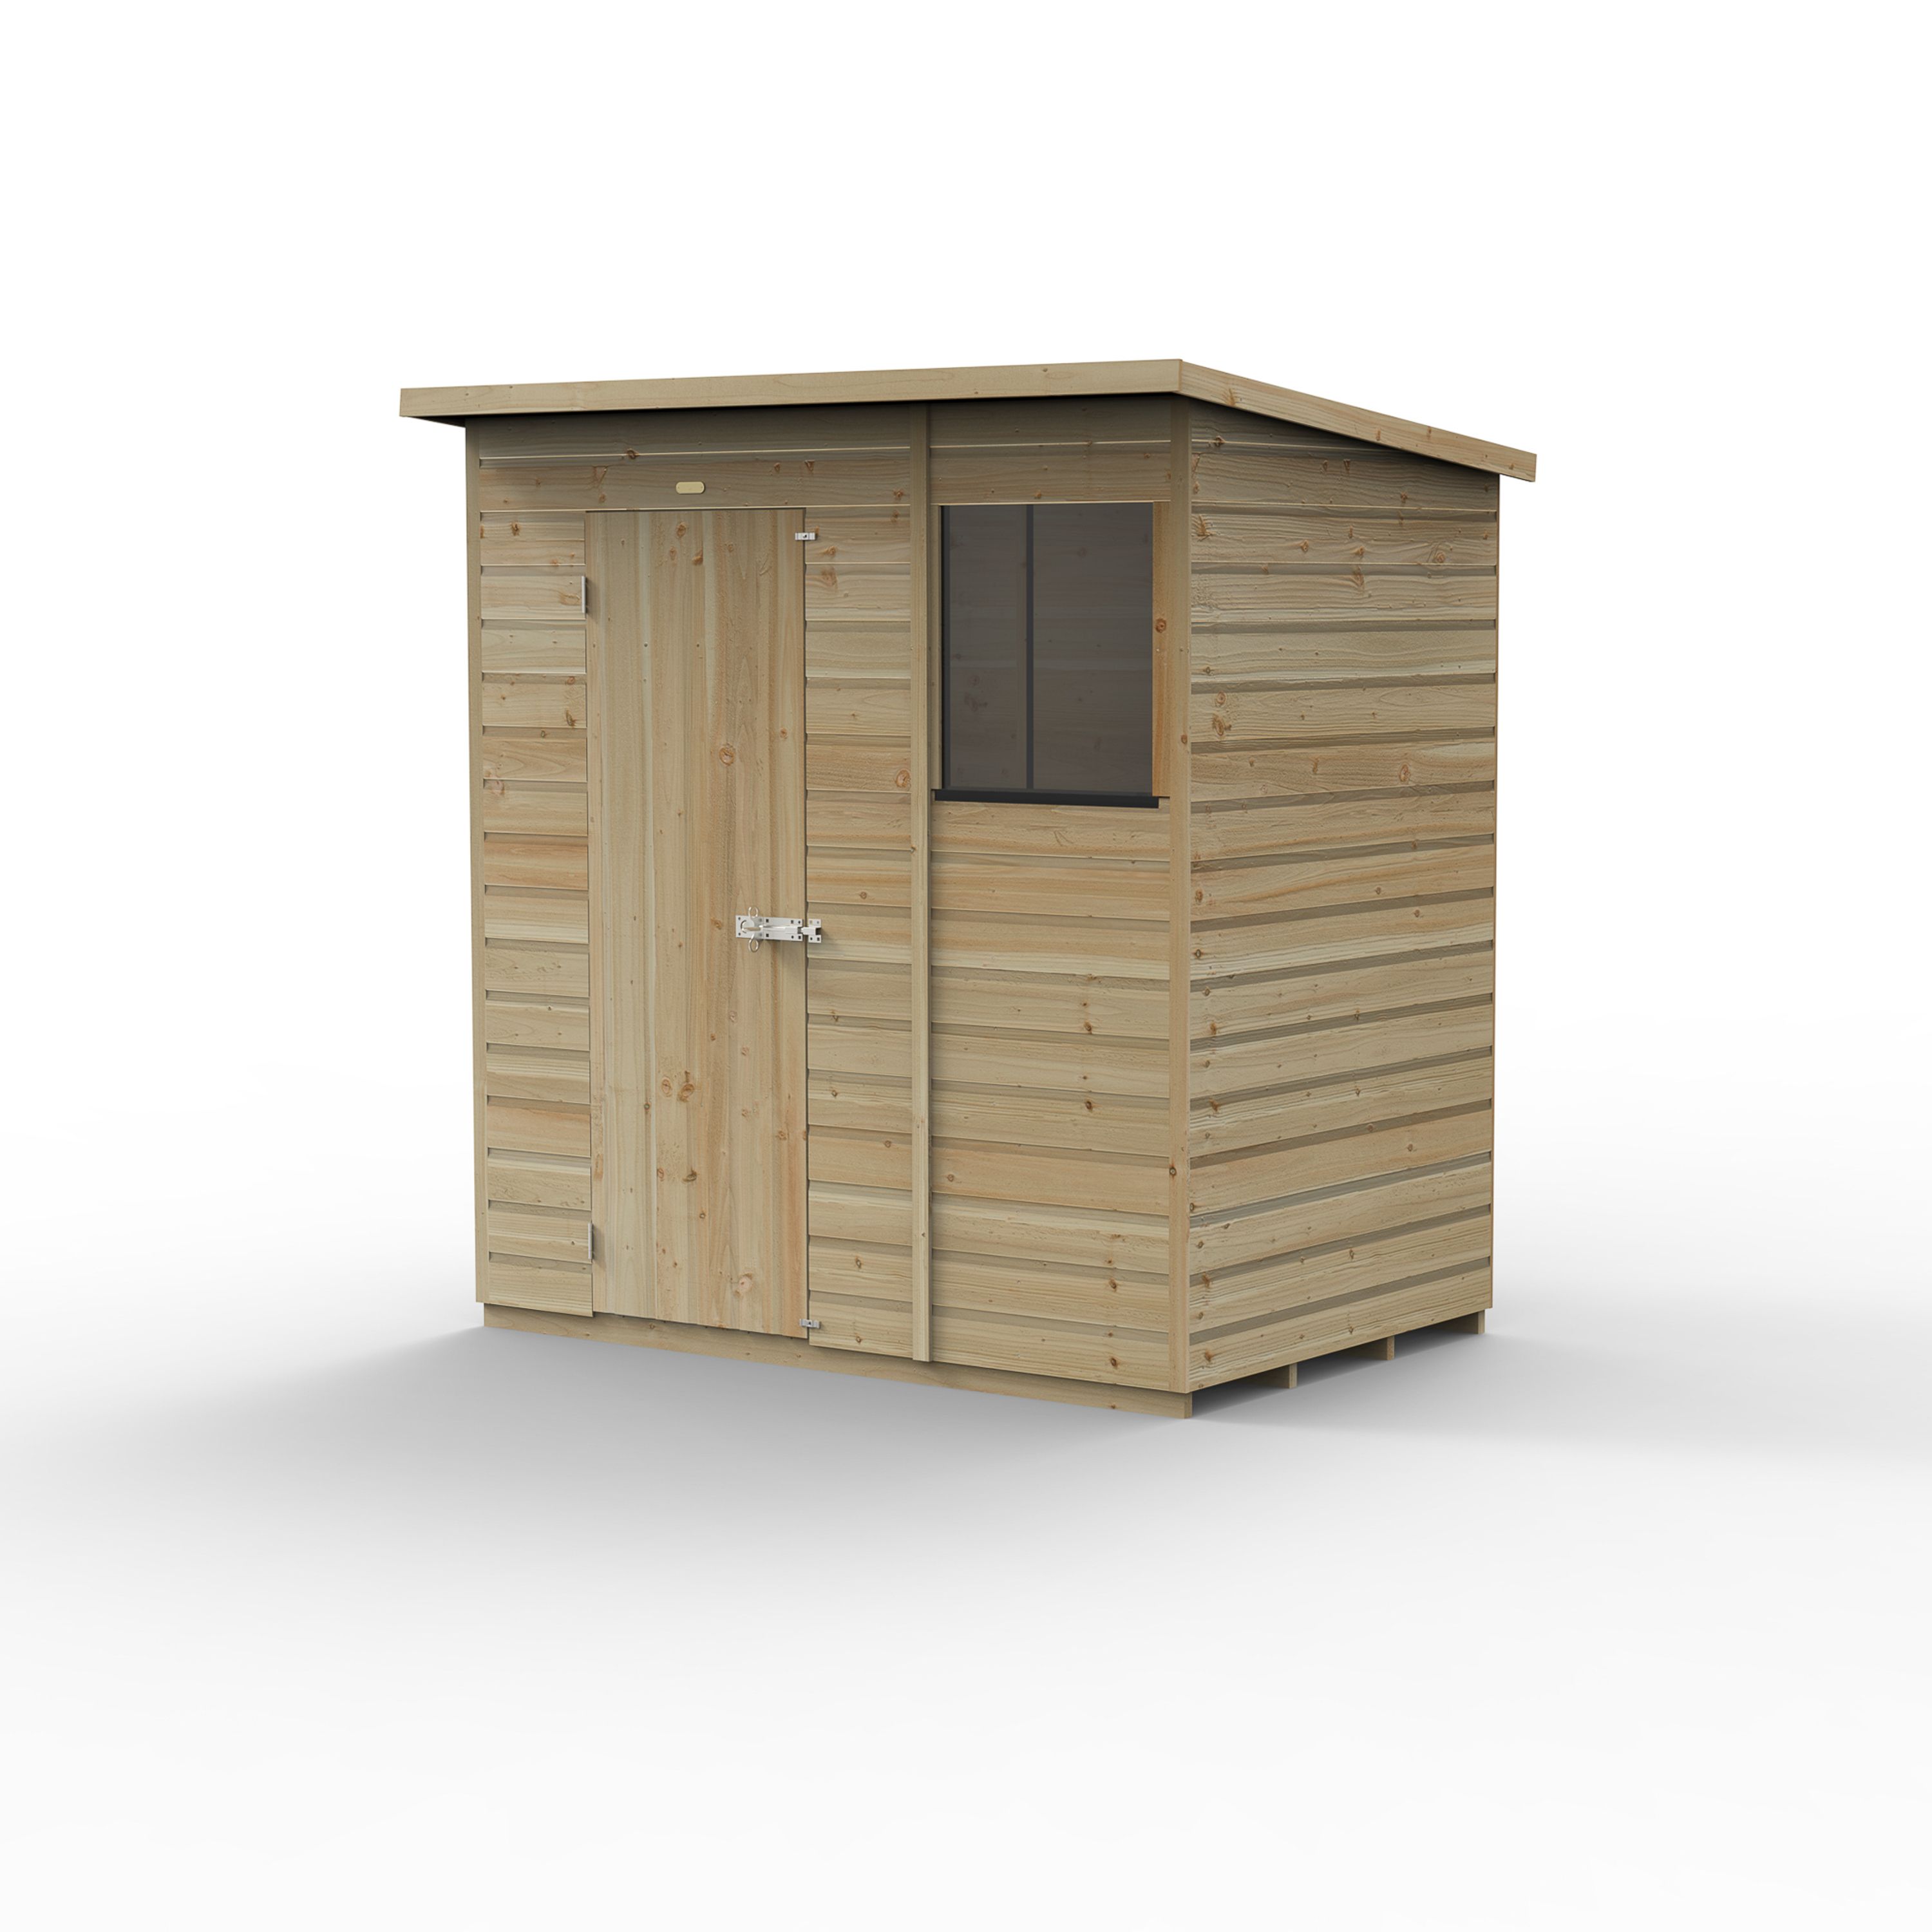 Forest Garden Beckwood 6x4 ft Pent Natural timber Wooden Shed with floor & 1 window - Assembly not required